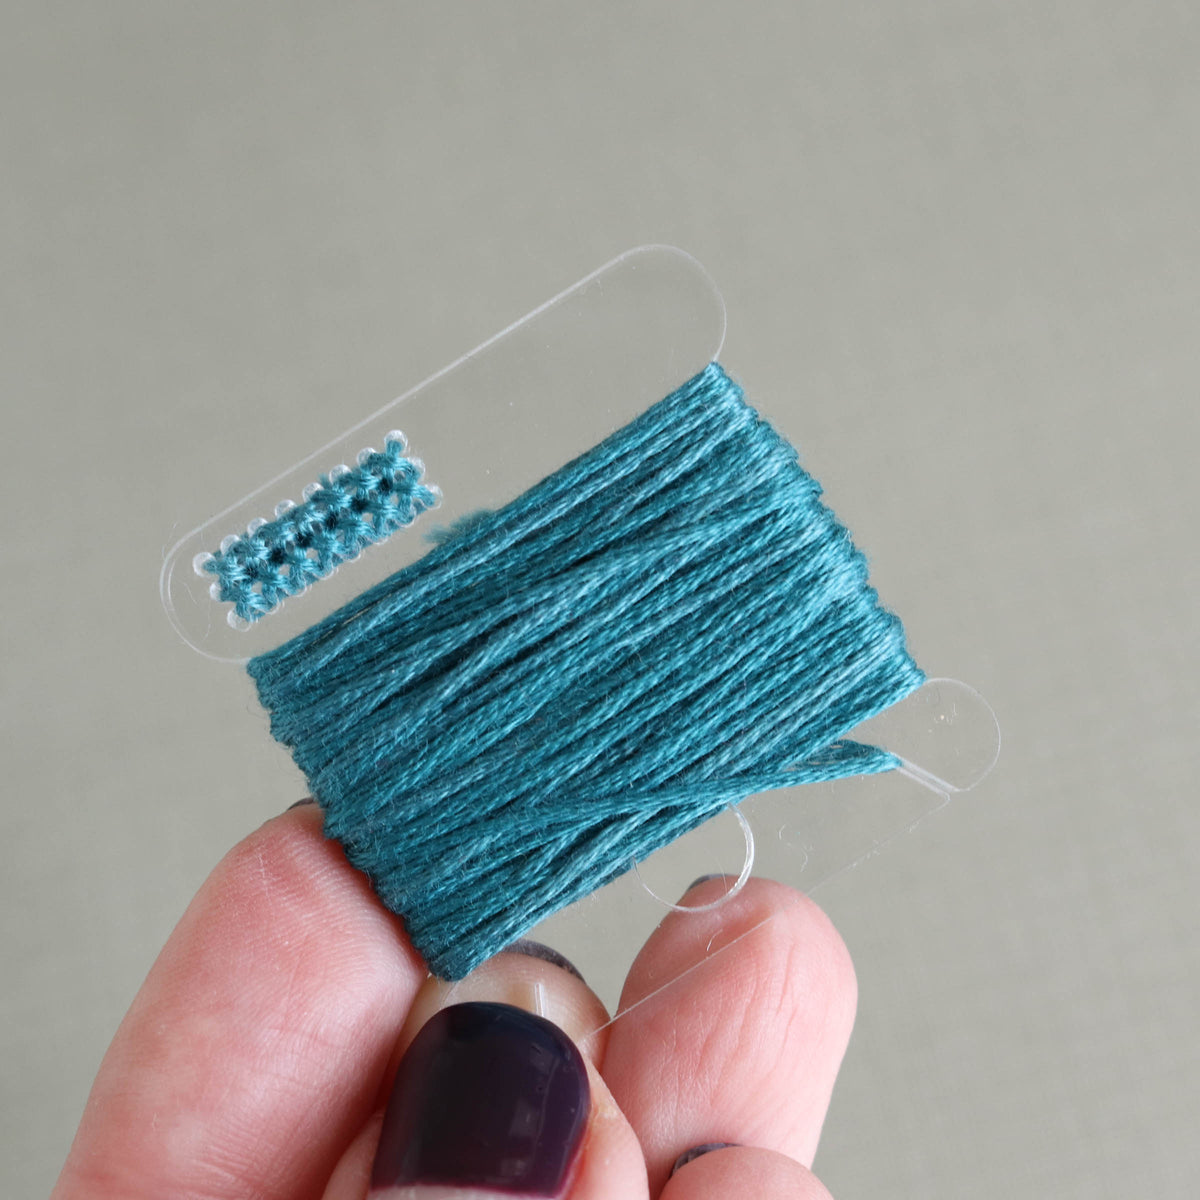 Embroidery Floss Swatch Bobbins